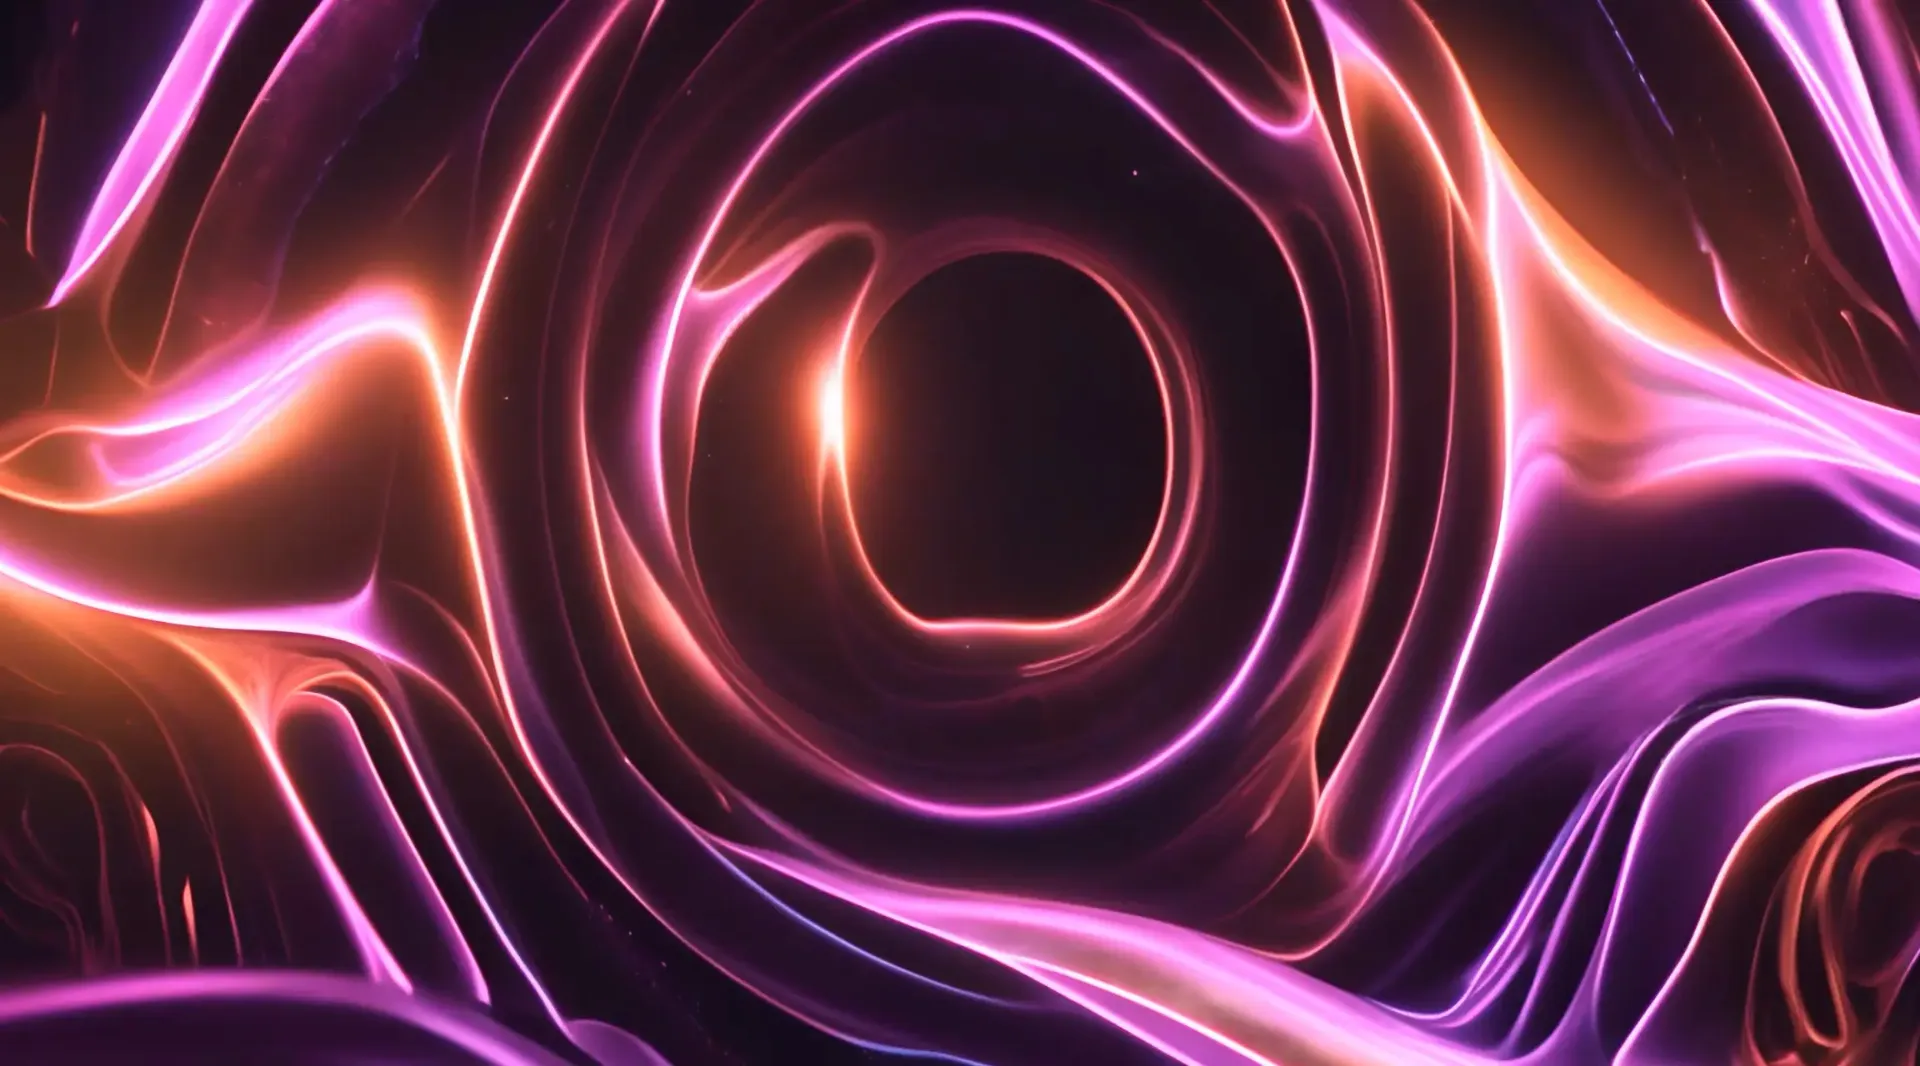 Psychedelic Neon Spirals Backdrop Artistic Stock Video